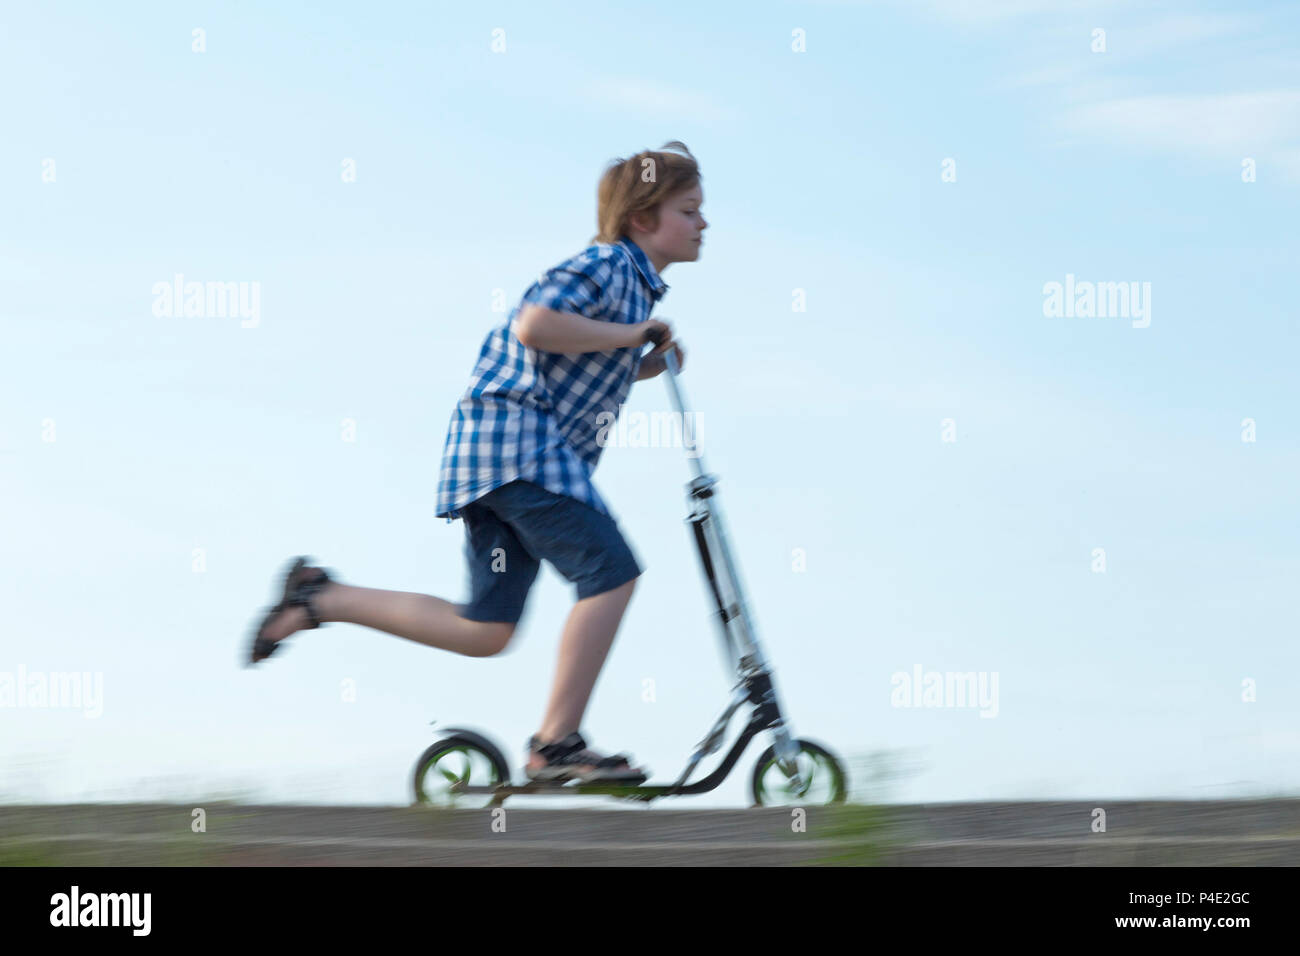 young boy riding his scooter Stock Photo